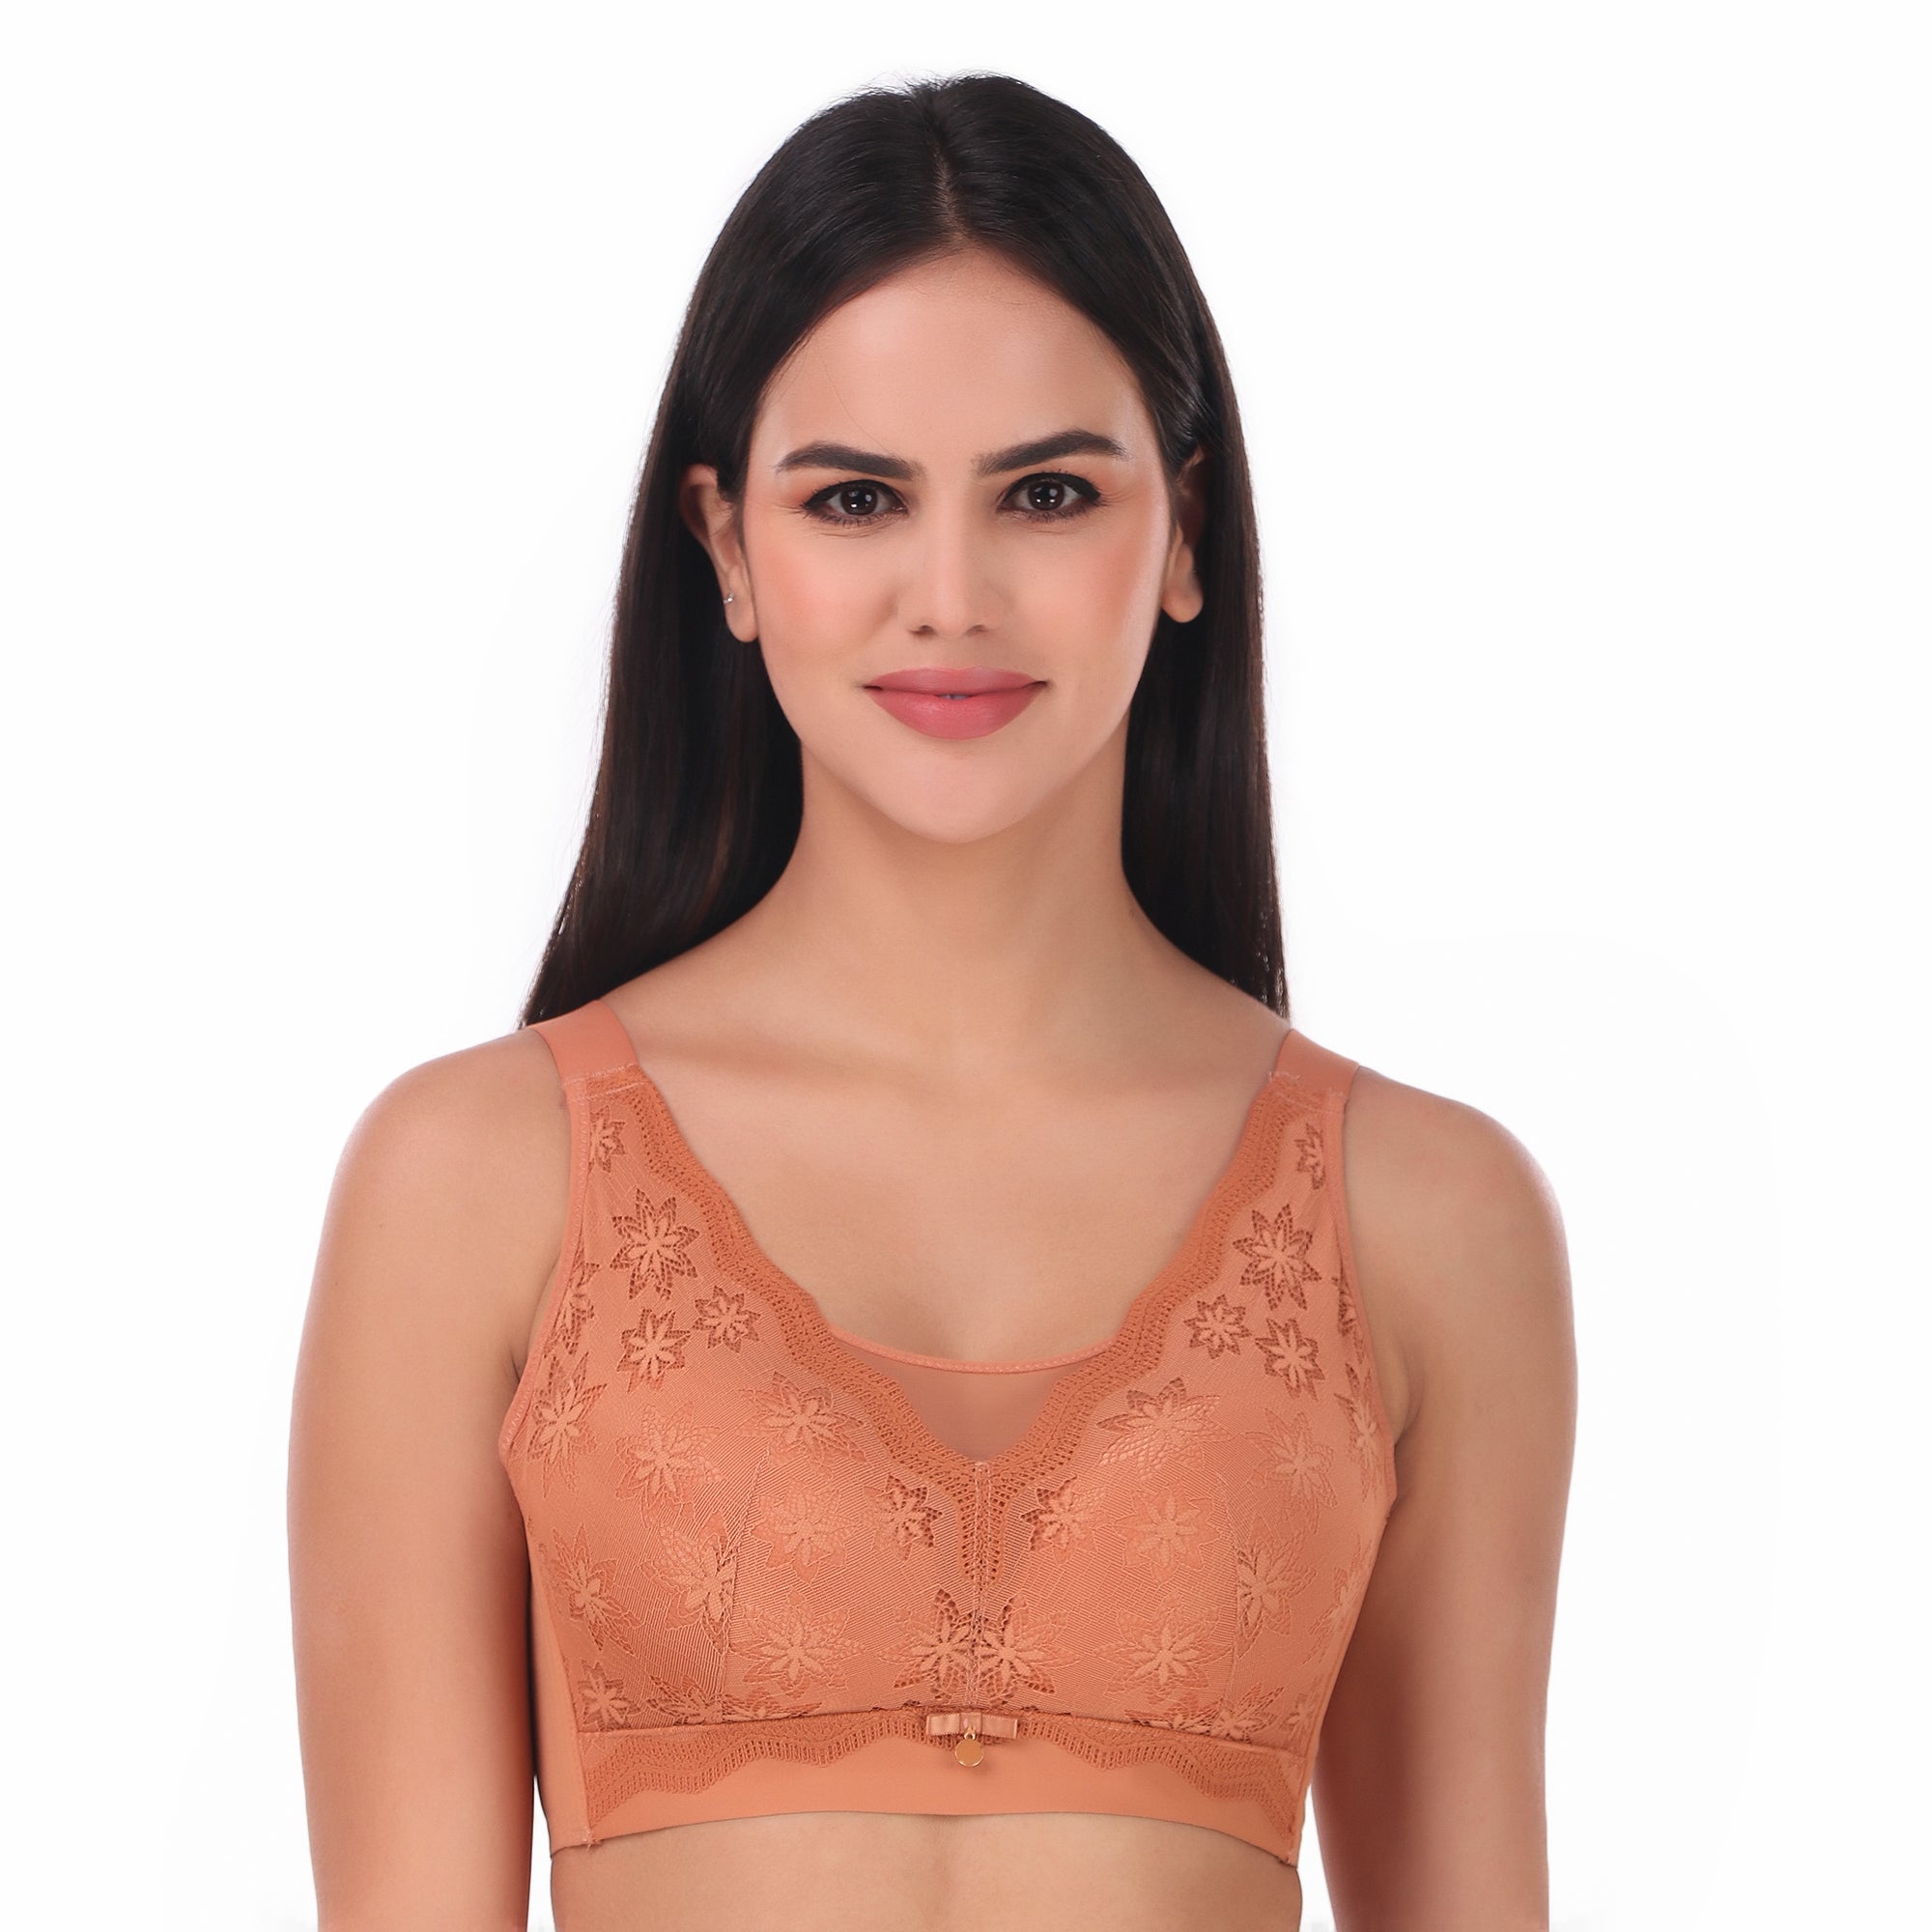 AMANTE BRA88101 Satin Touch Strapless Padded wired Lace Bra